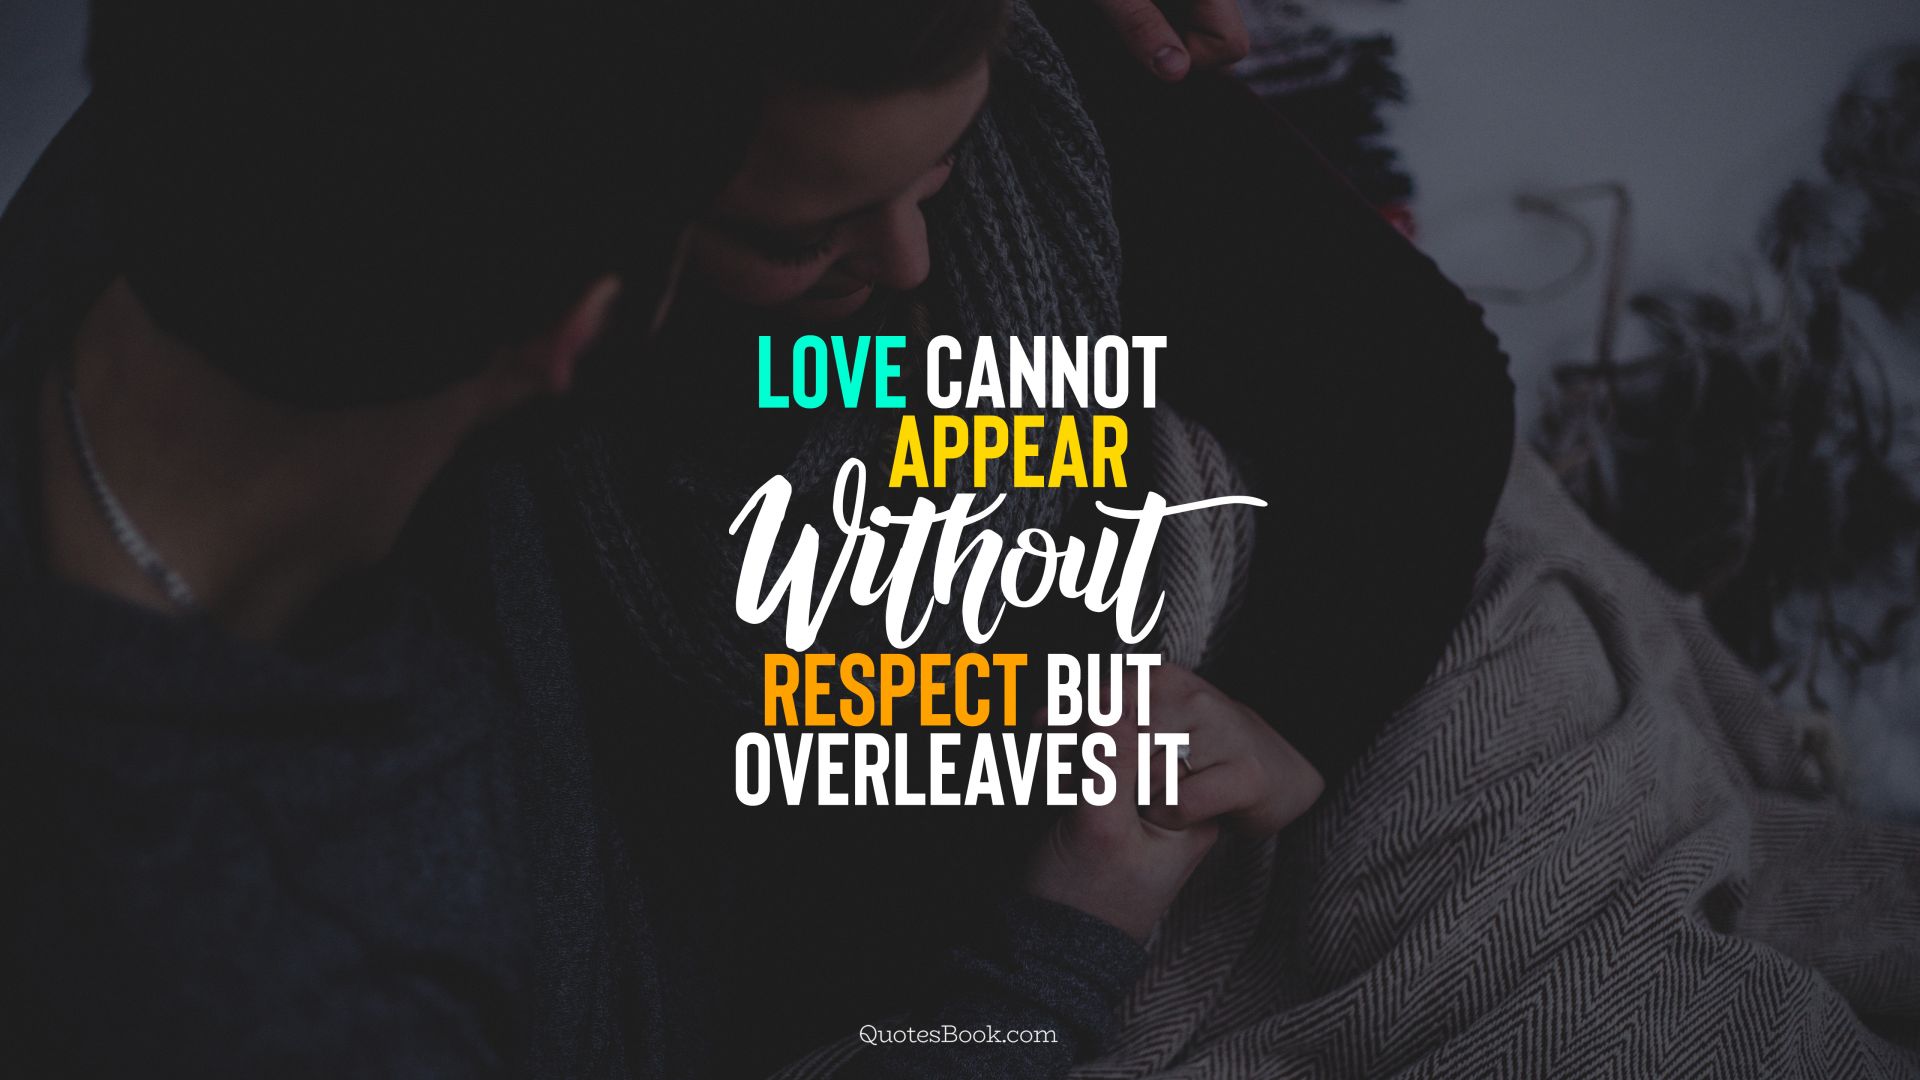 Love cannot appear without respect but overleaves it